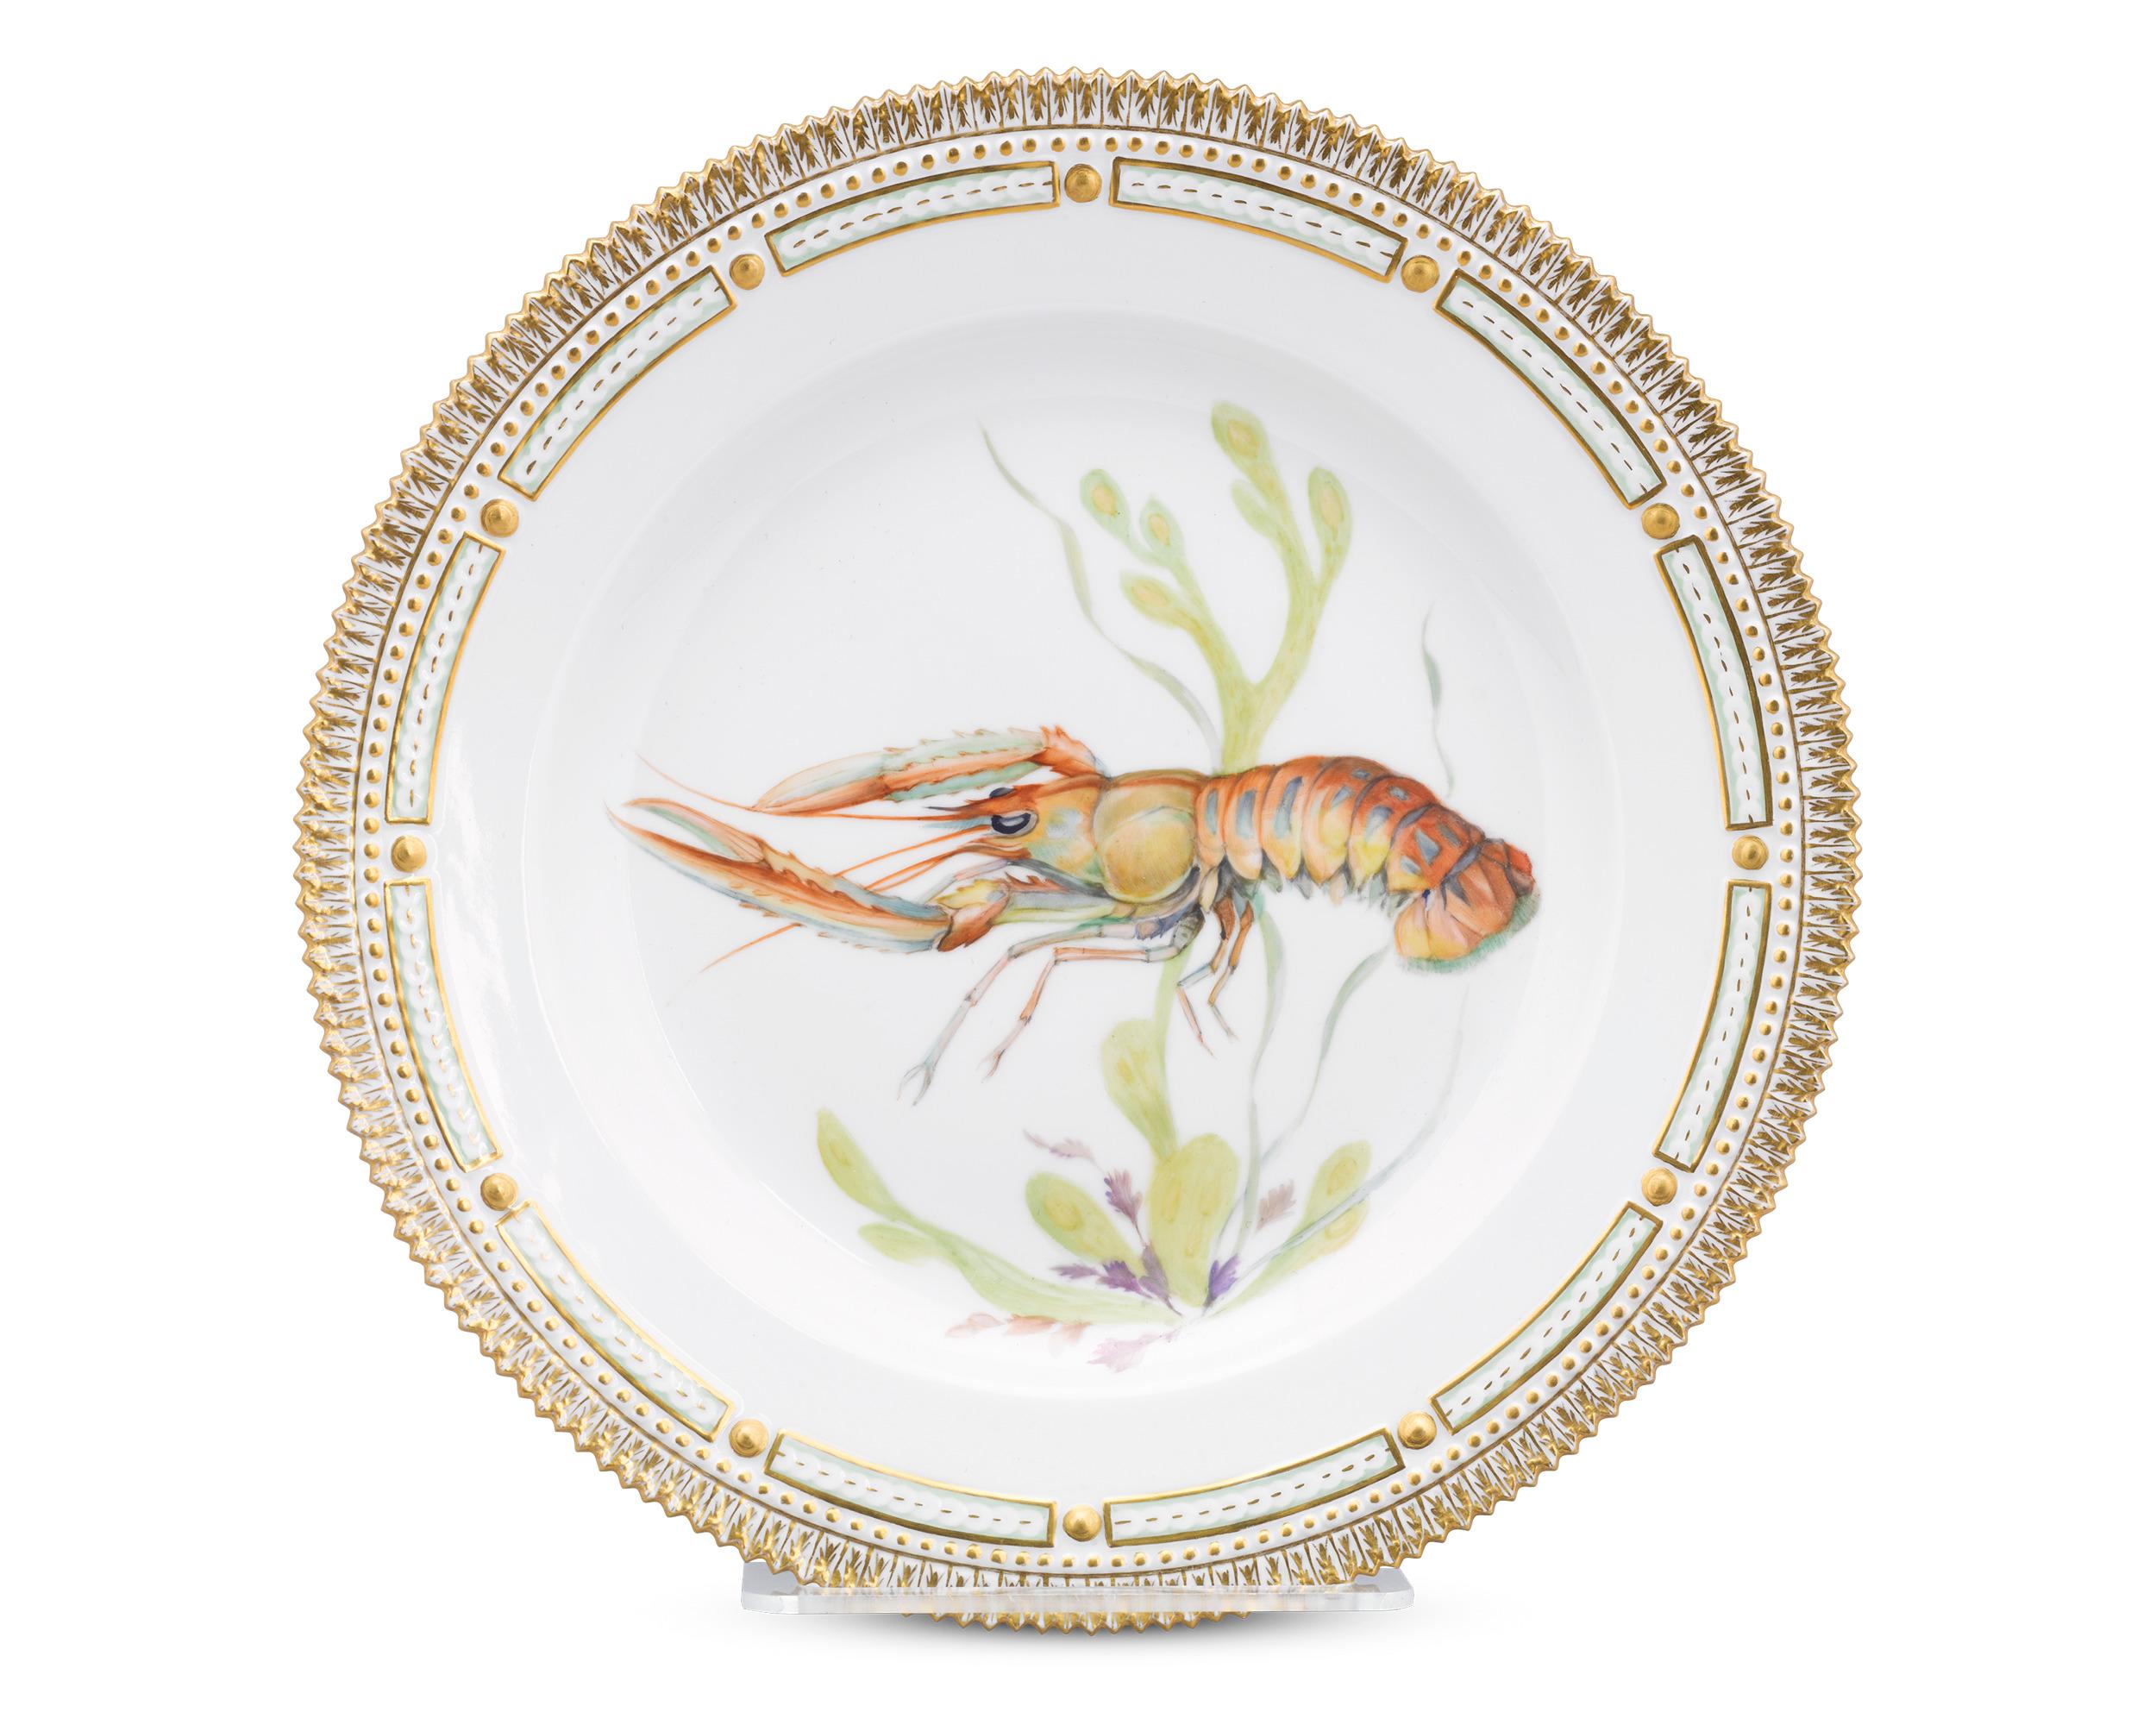 The impeccable artistry of Royal Copenhagen’s Flora Danica porcelain is on display in this rare crustacean plate. Flora Danica is widely celebrated for the motif’s highly detailed illustrations of native flowers of Denmark. However, this plate